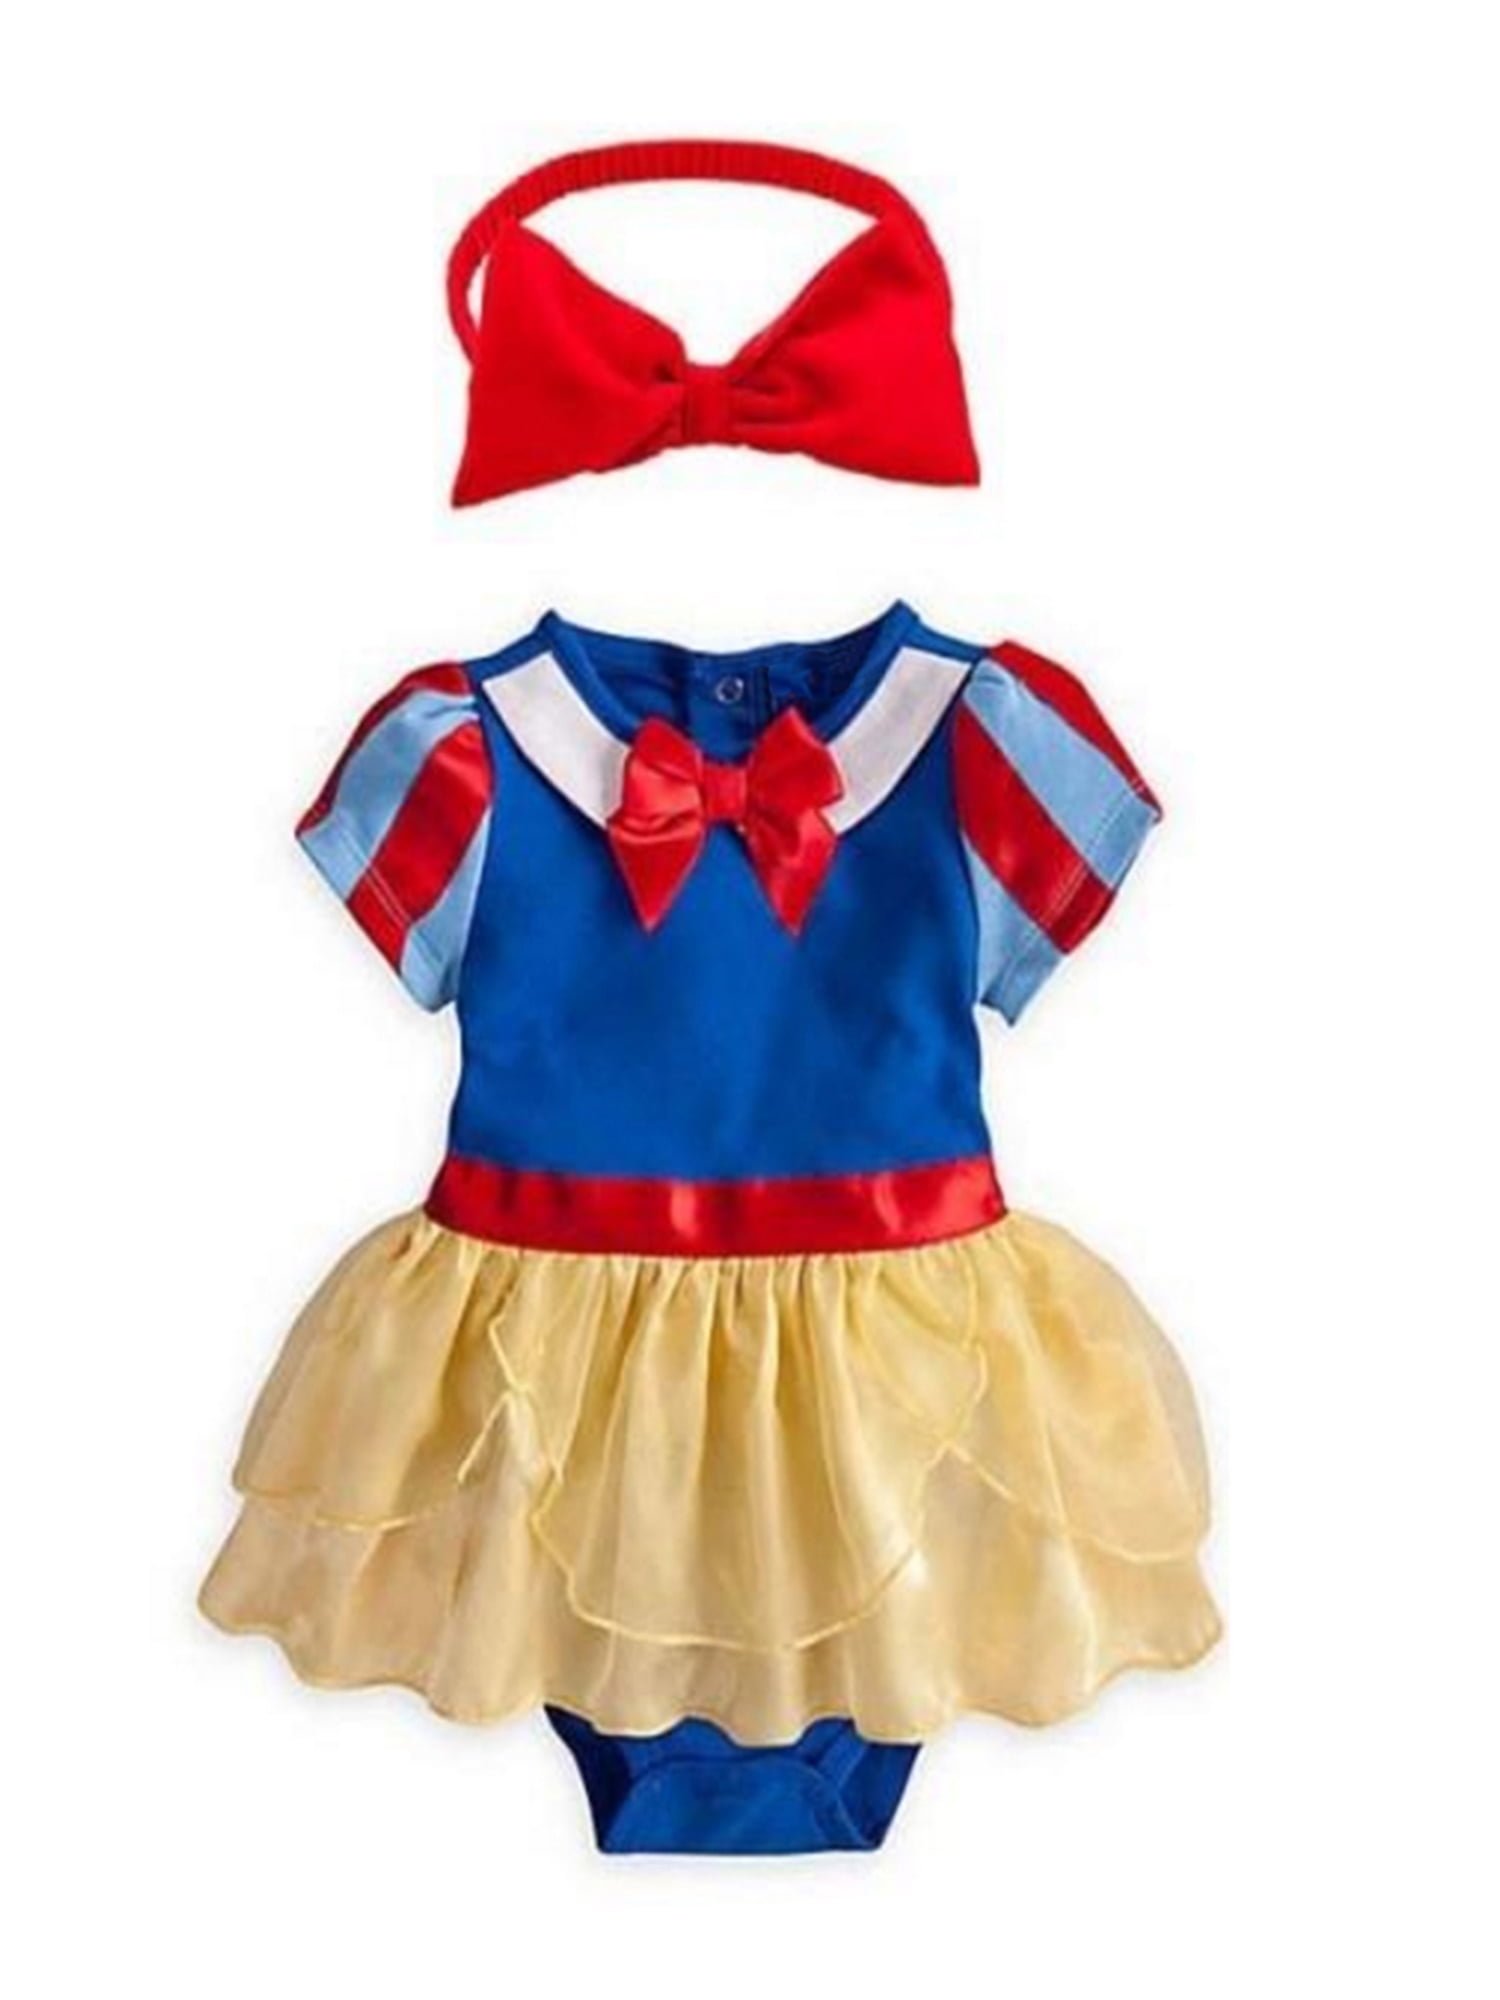 snow white outfit baby